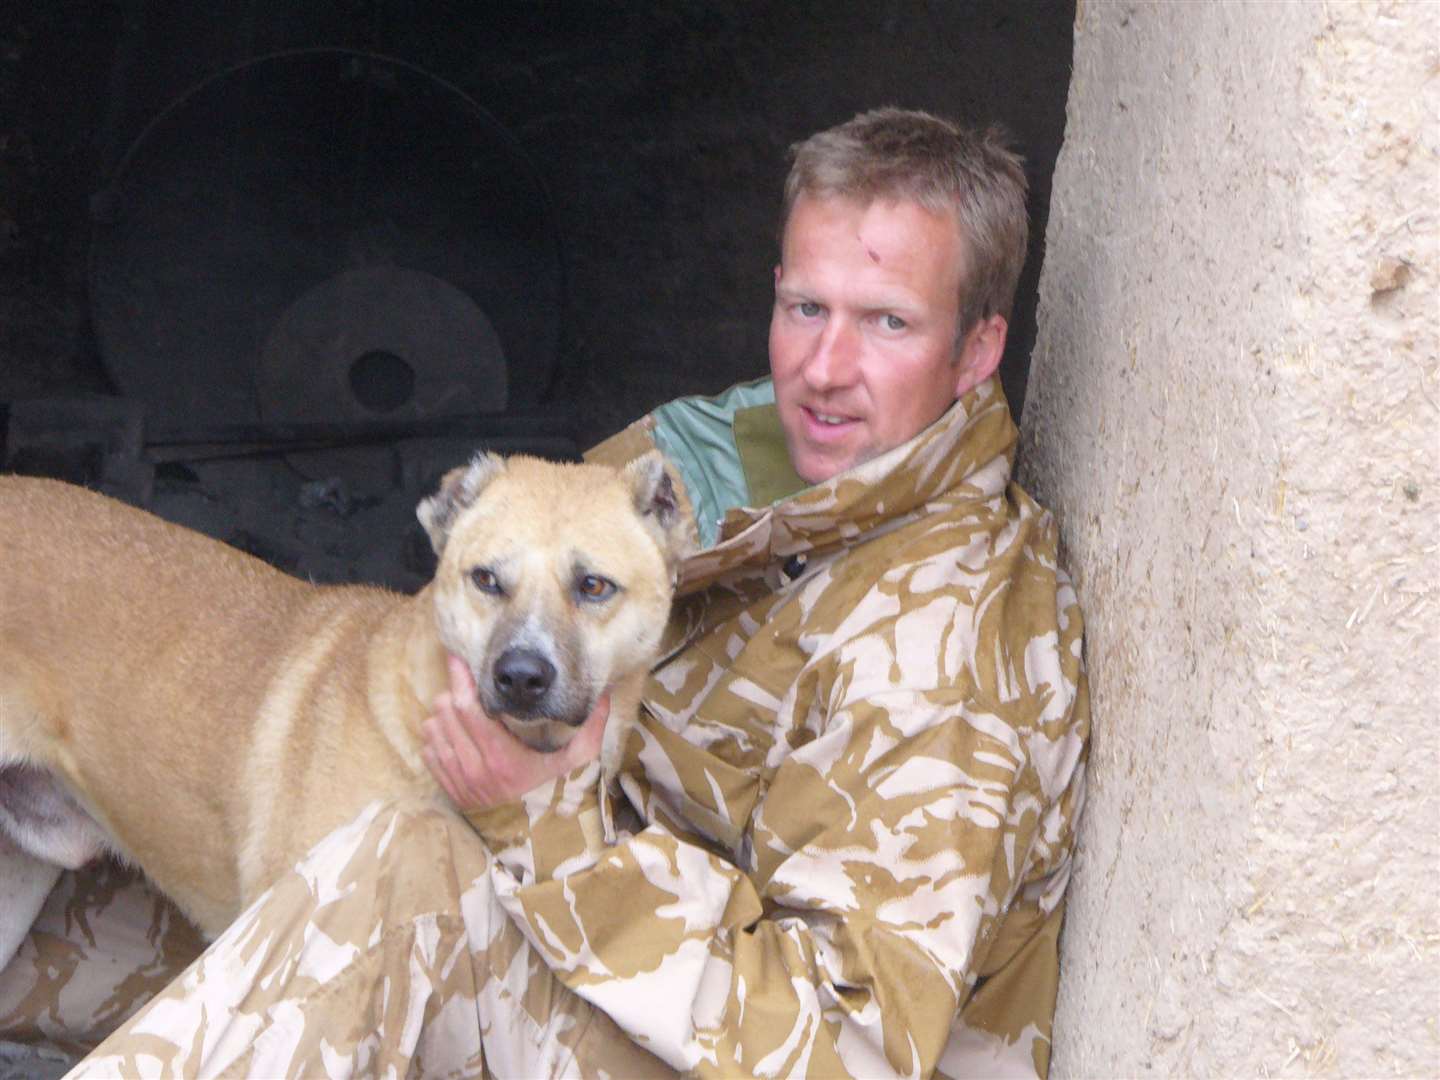 Pen Farthing, who founded the Nowzad Dogs charity. Picture: Alison Westbrook